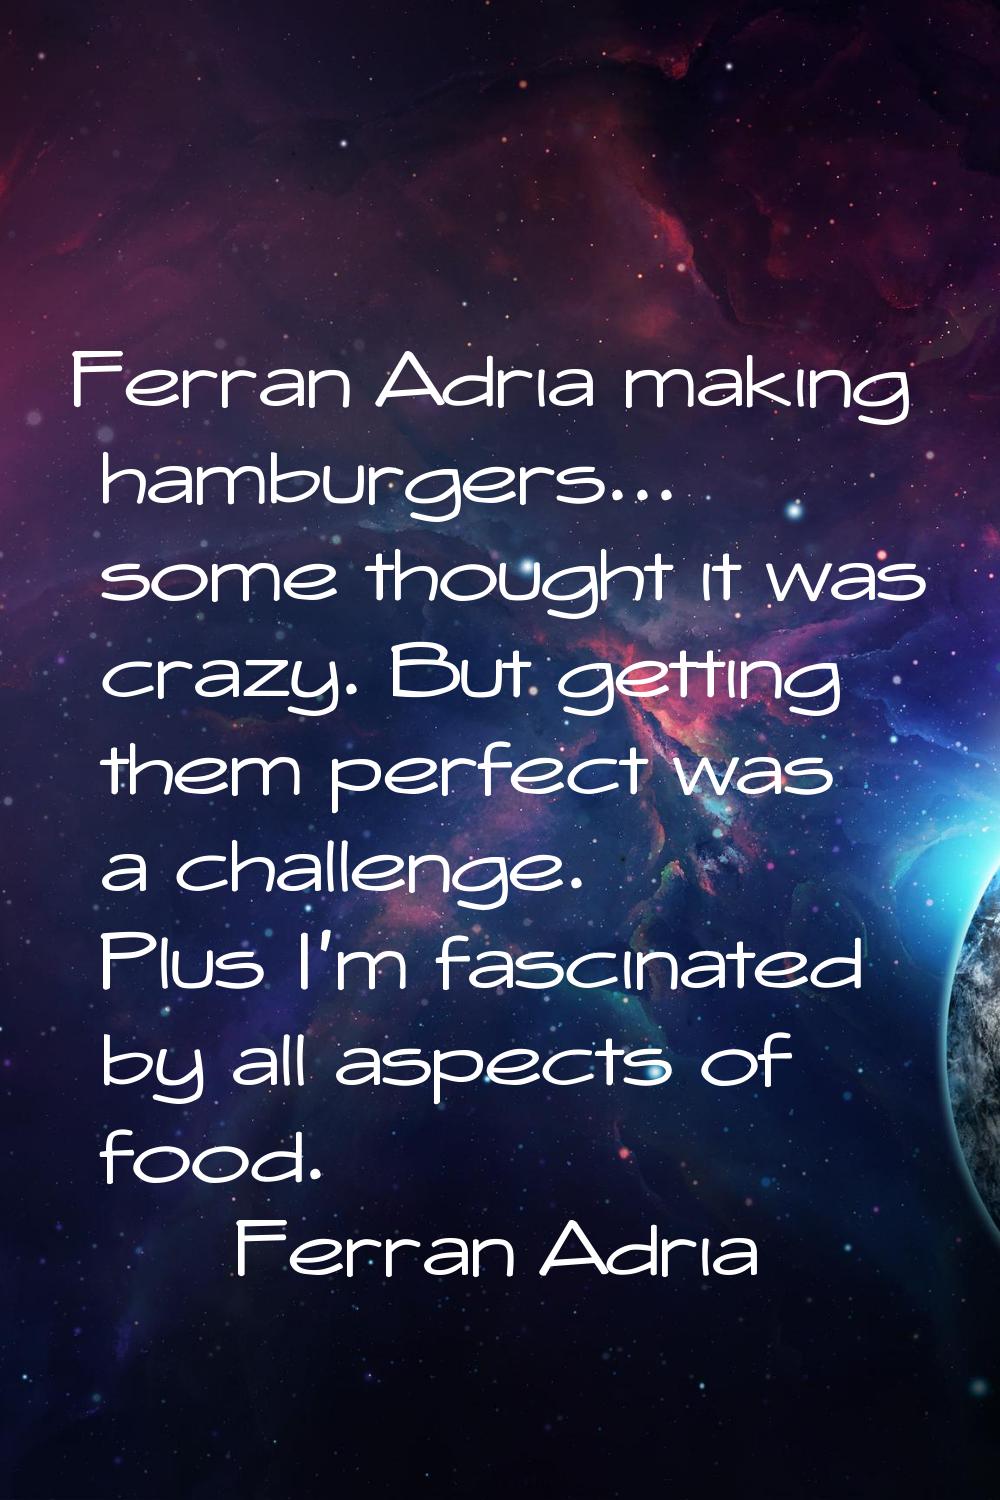 Ferran Adria making hamburgers... some thought it was crazy. But getting them perfect was a challen